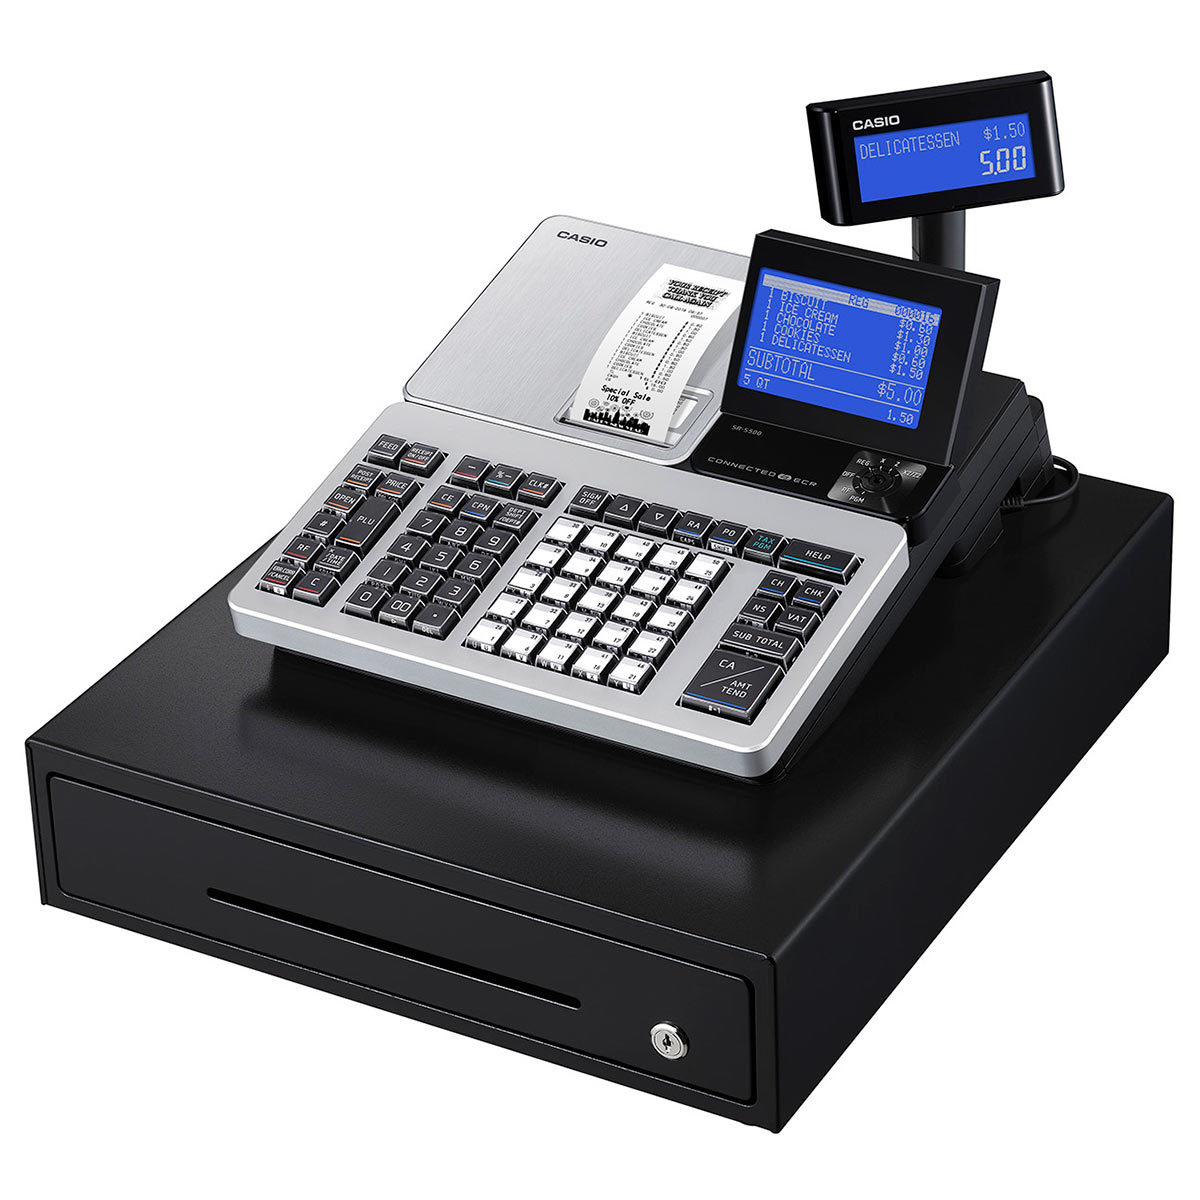 Casio cash register with display up